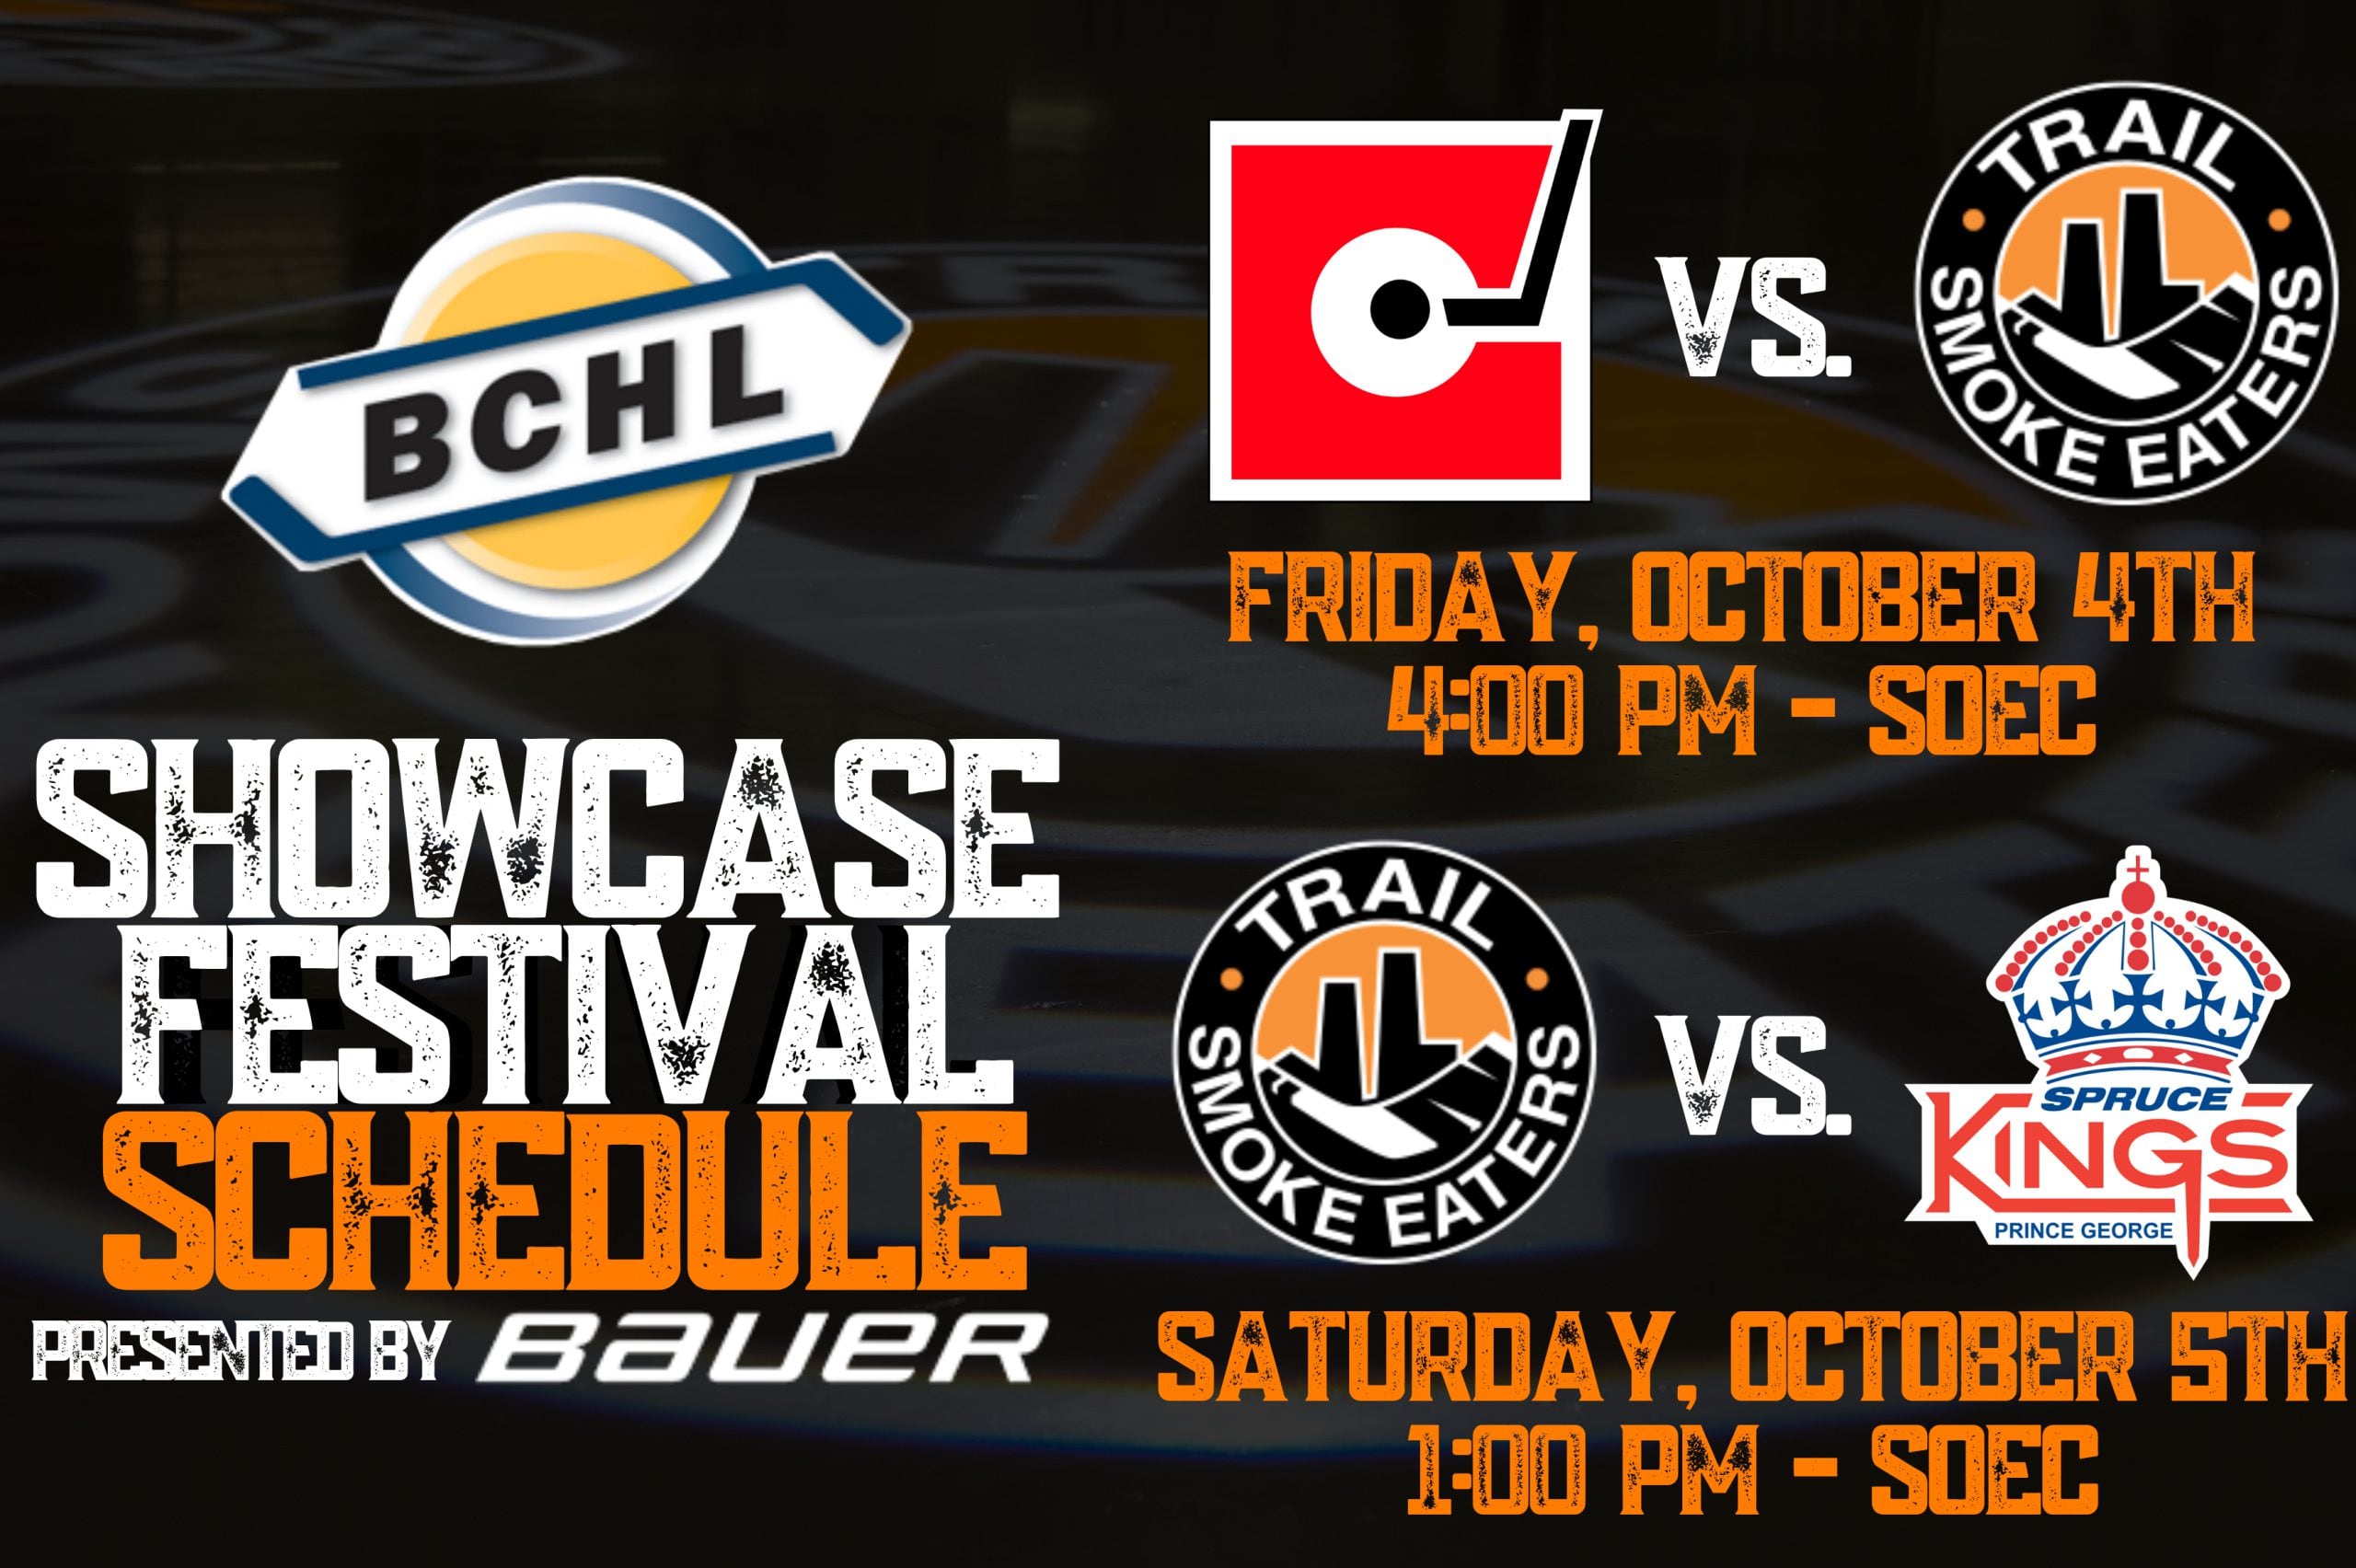 Smoke Eaters & BCHL Release Details And Schedule For 2019 Showcase Festival Presented By Bauer